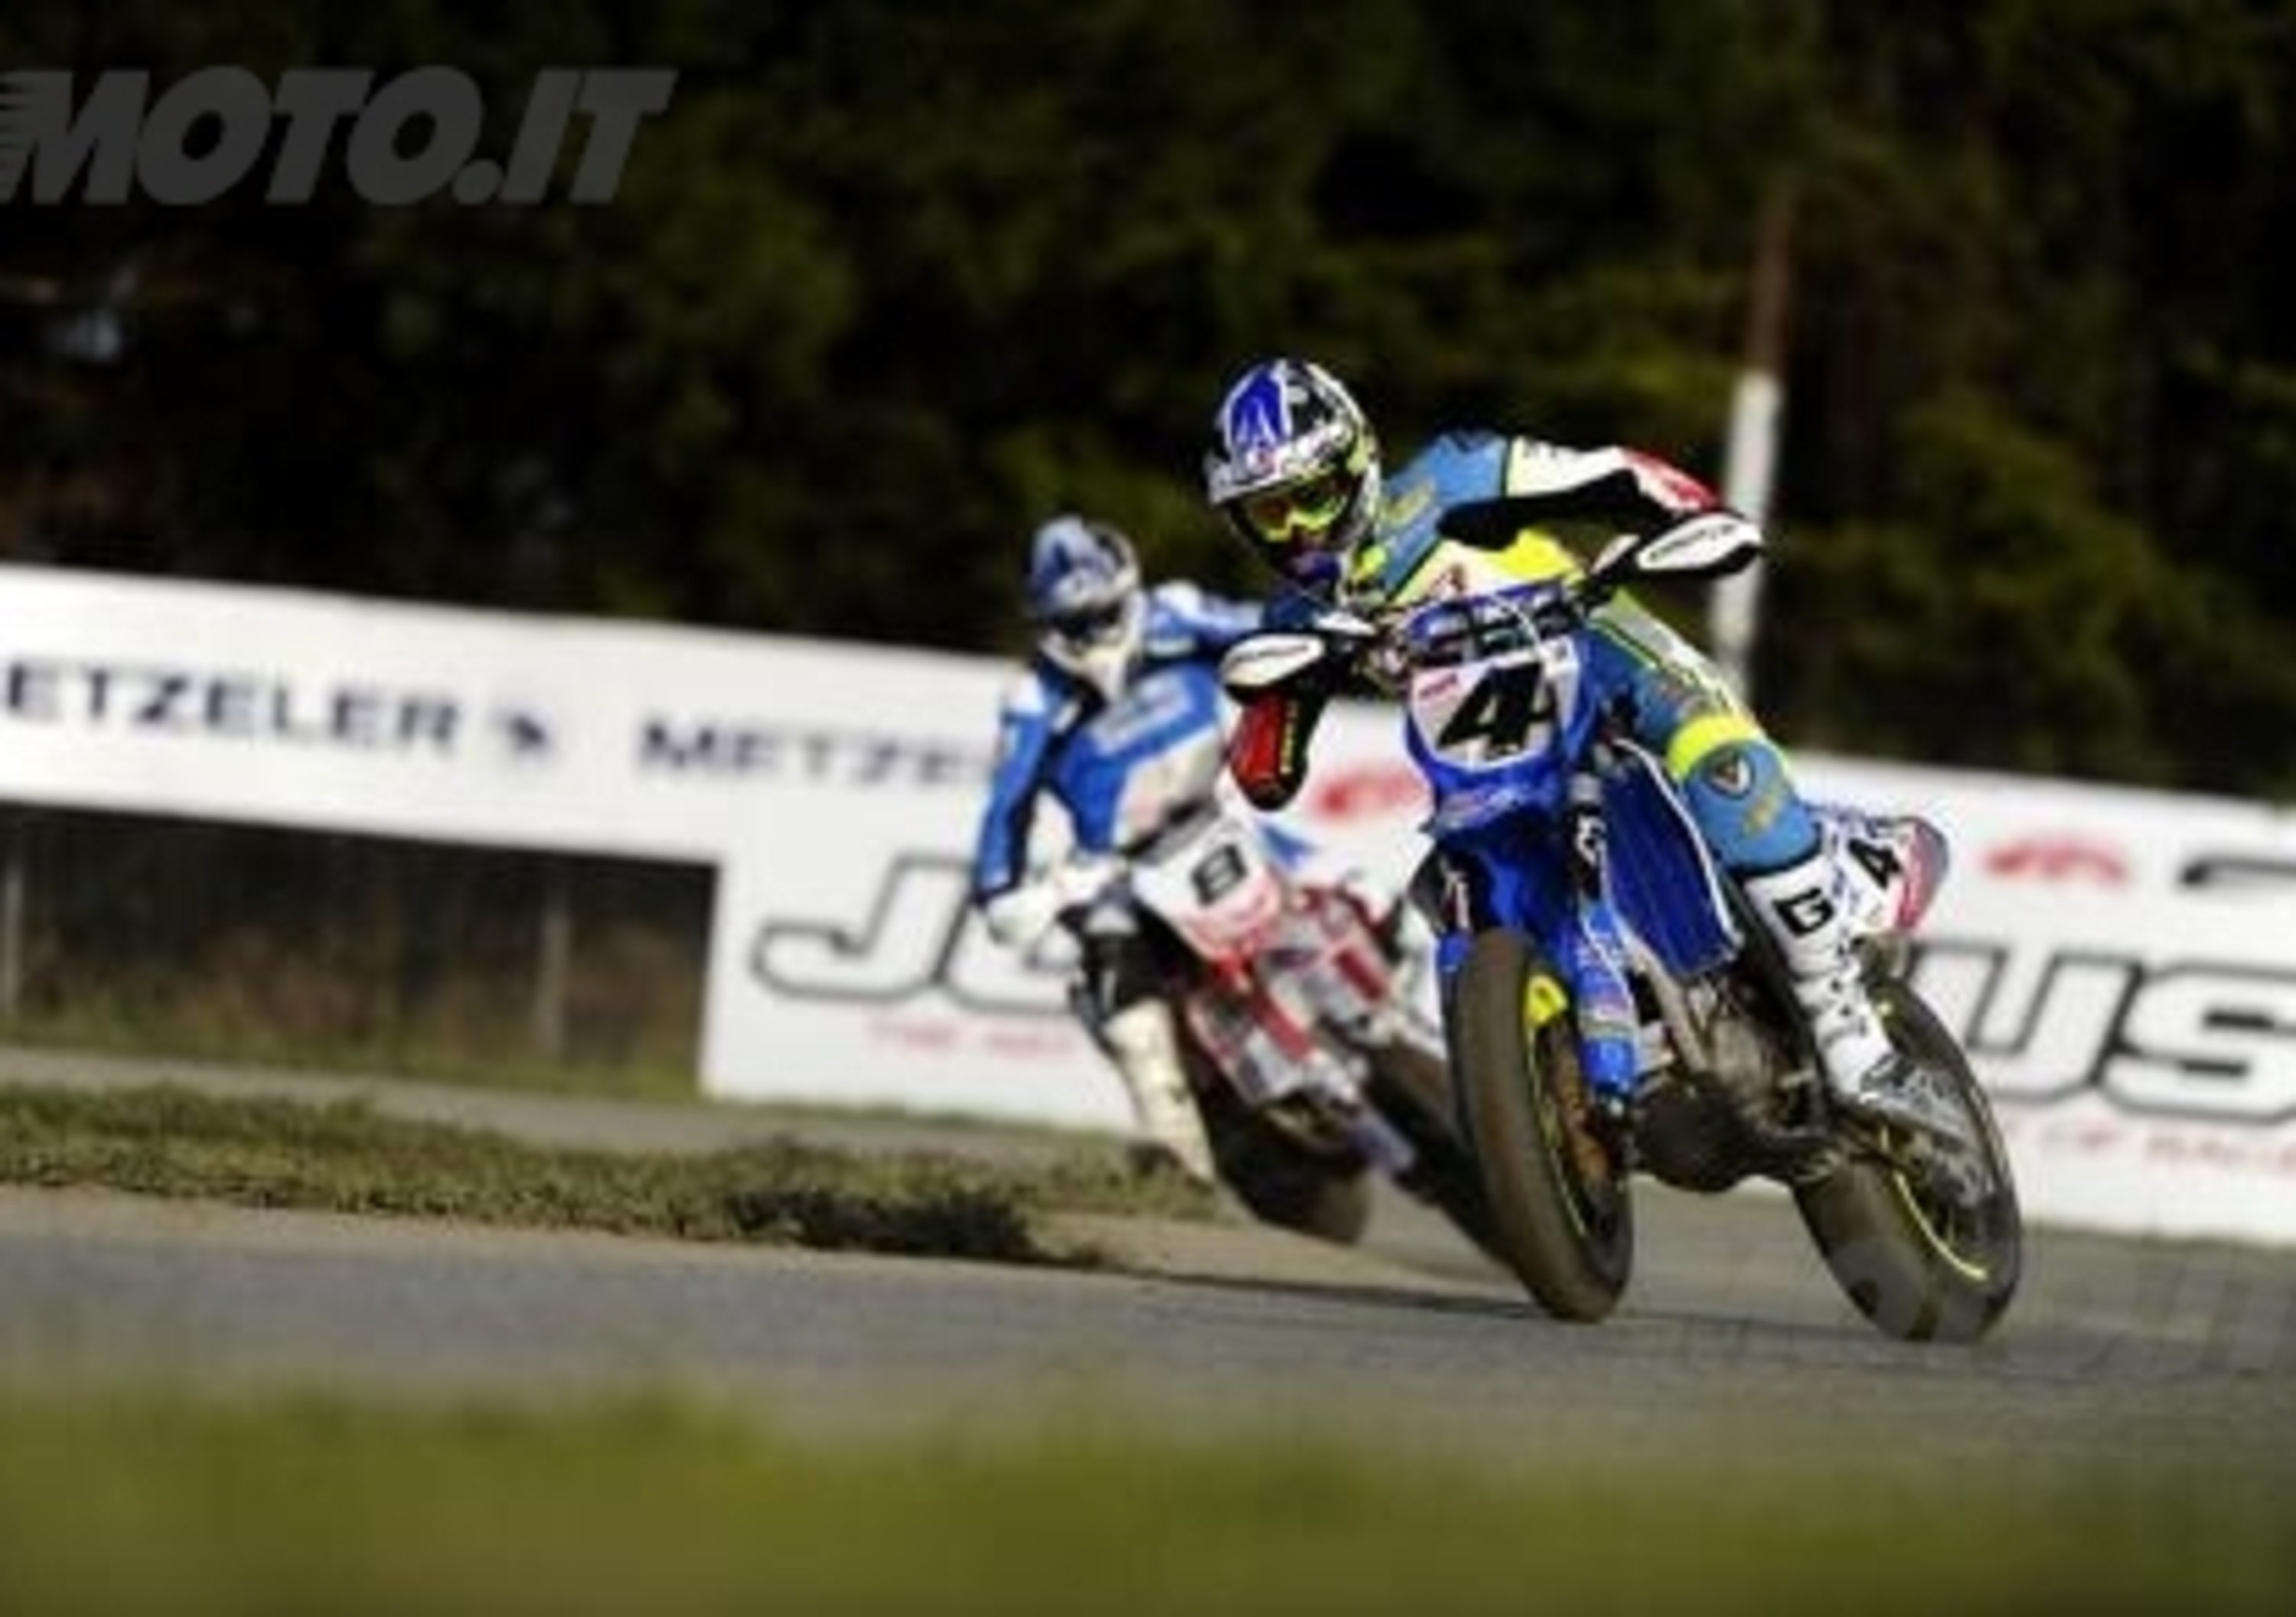 Supermotard in piazza il prossimo week end a Lissone